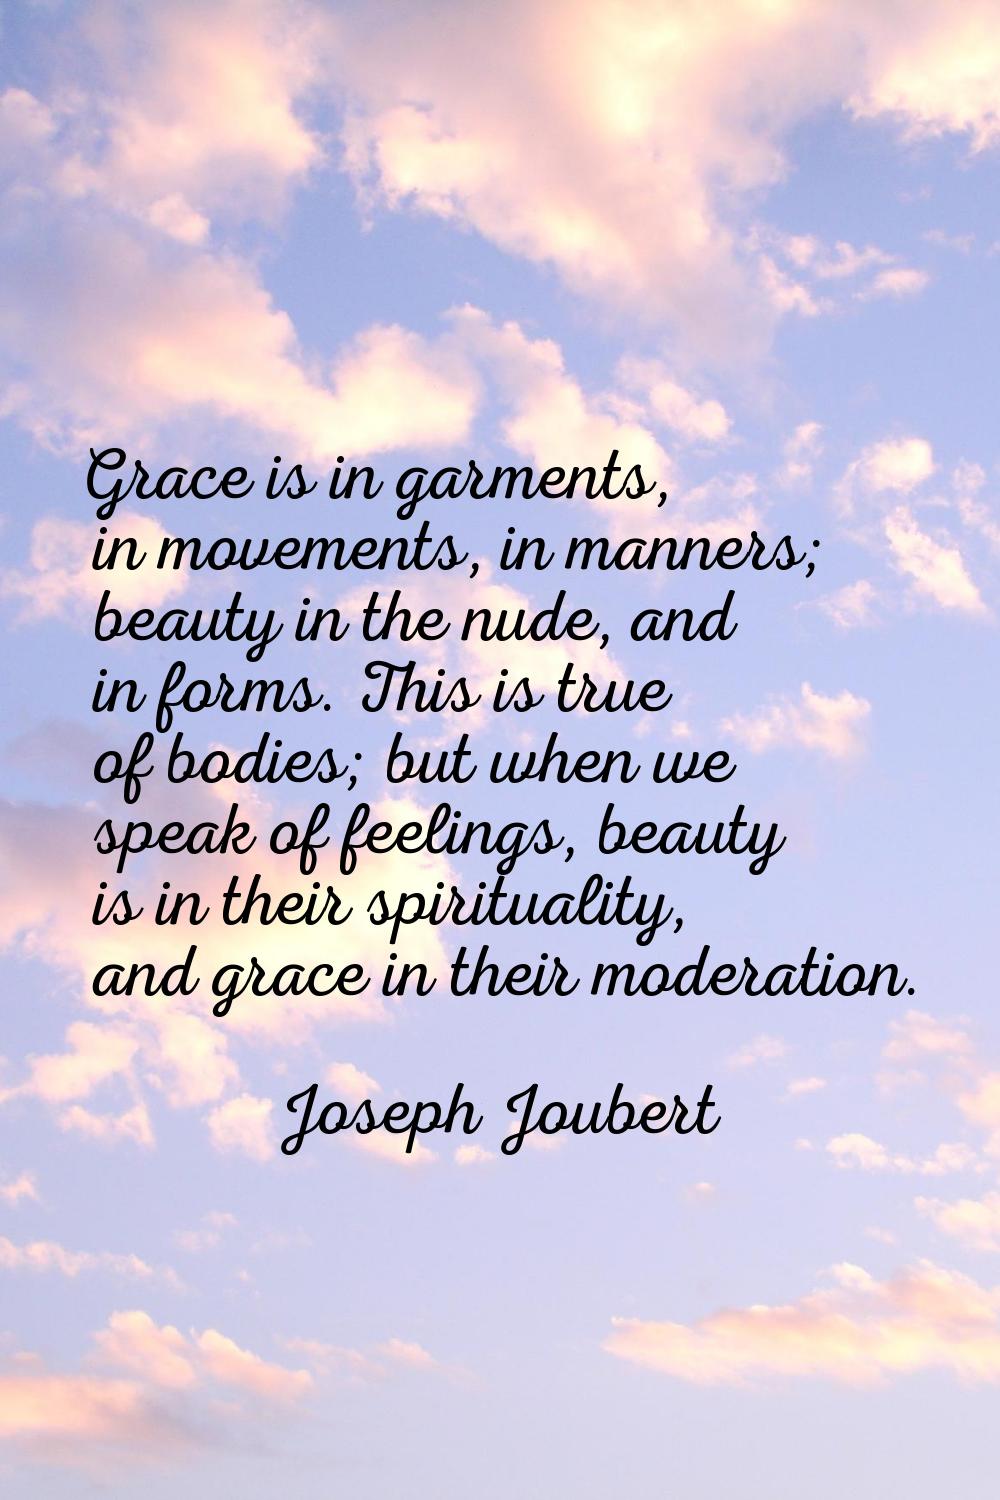 Grace is in garments, in movements, in manners; beauty in the nude, and in forms. This is true of b